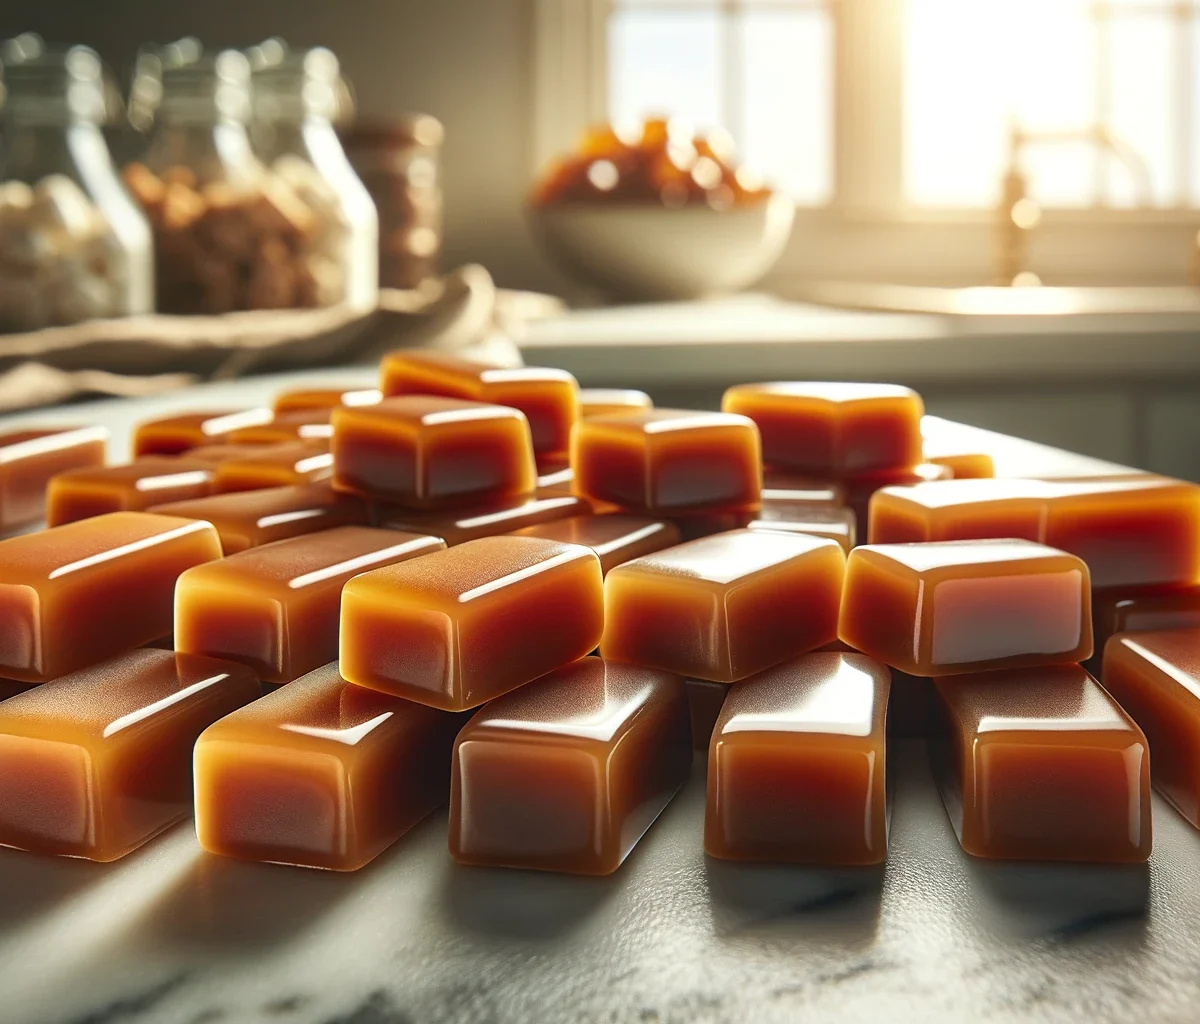 How To Make Cannabis Caramels